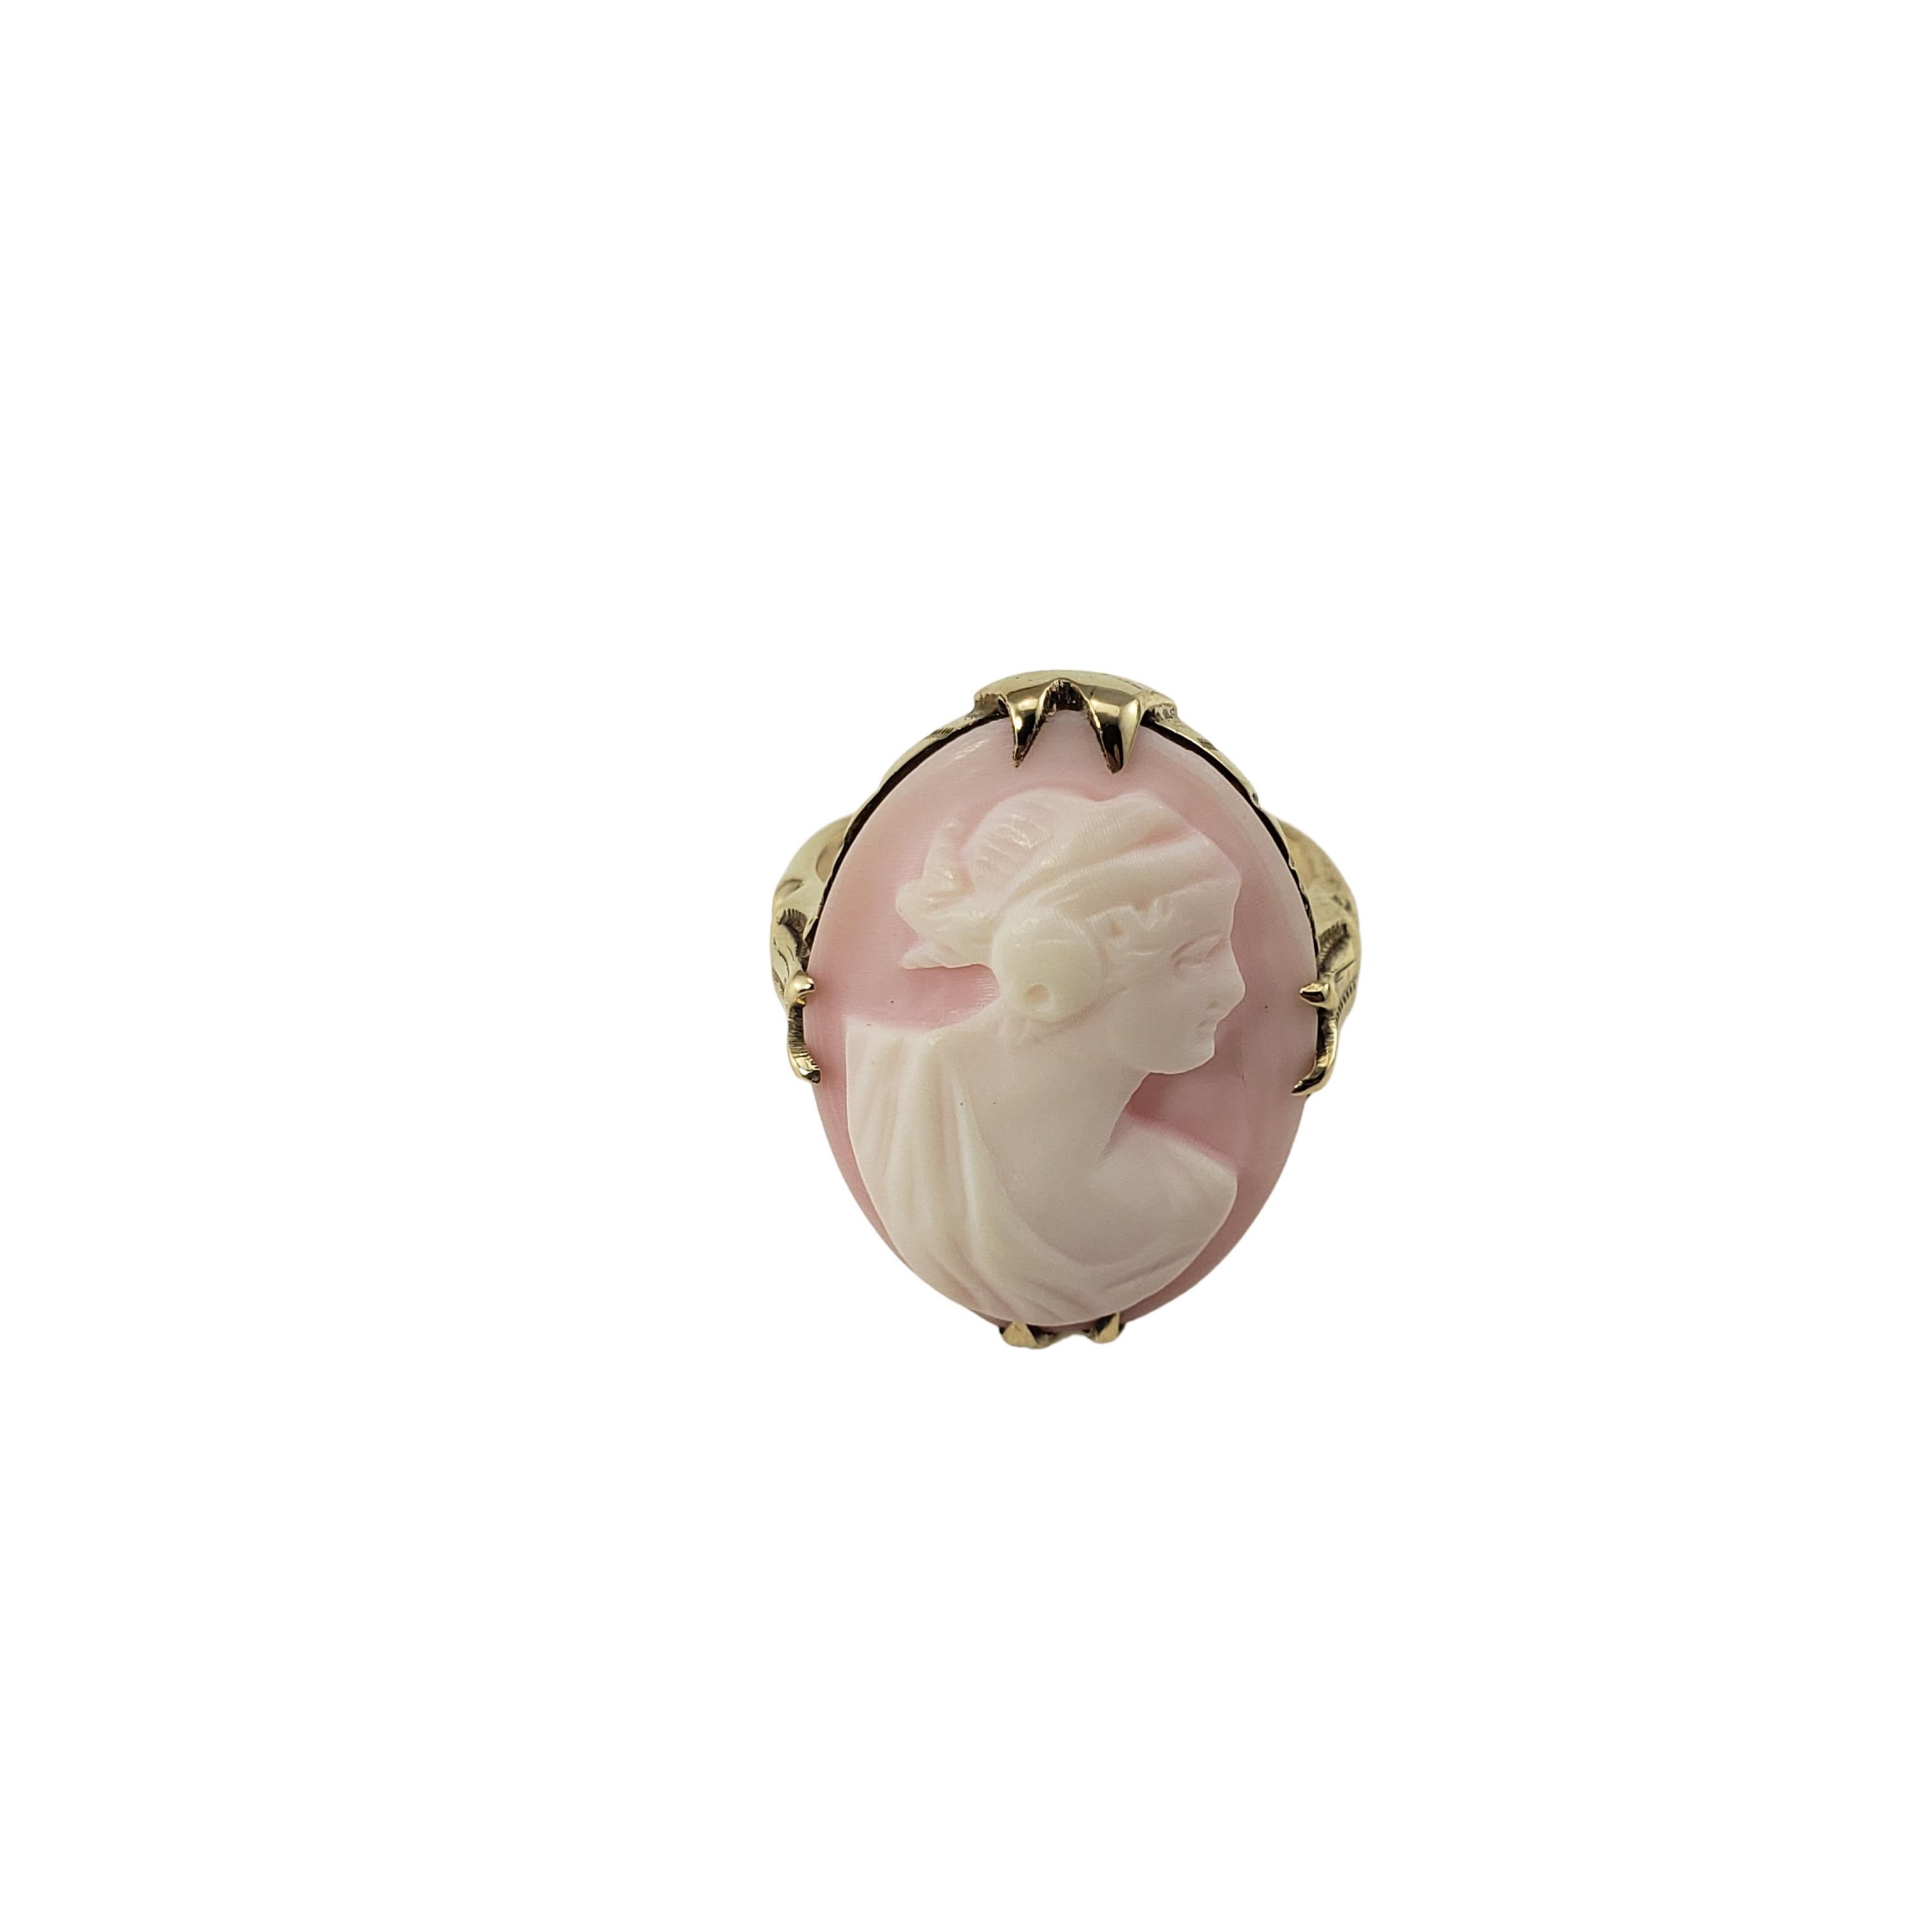 Vintage 10 Karat Yellow Gold Cameo Ring Size 5.5-

This elegant cameo ring features a lovely lady in profile set in classic 10K yellow gold. Top of ring measures 22 mm x 16 mm.
Shank: 1.5 mm.

Ring Size: 5.5

Weight: 2.5 dwt. / 4.0 gr.

Stamped: